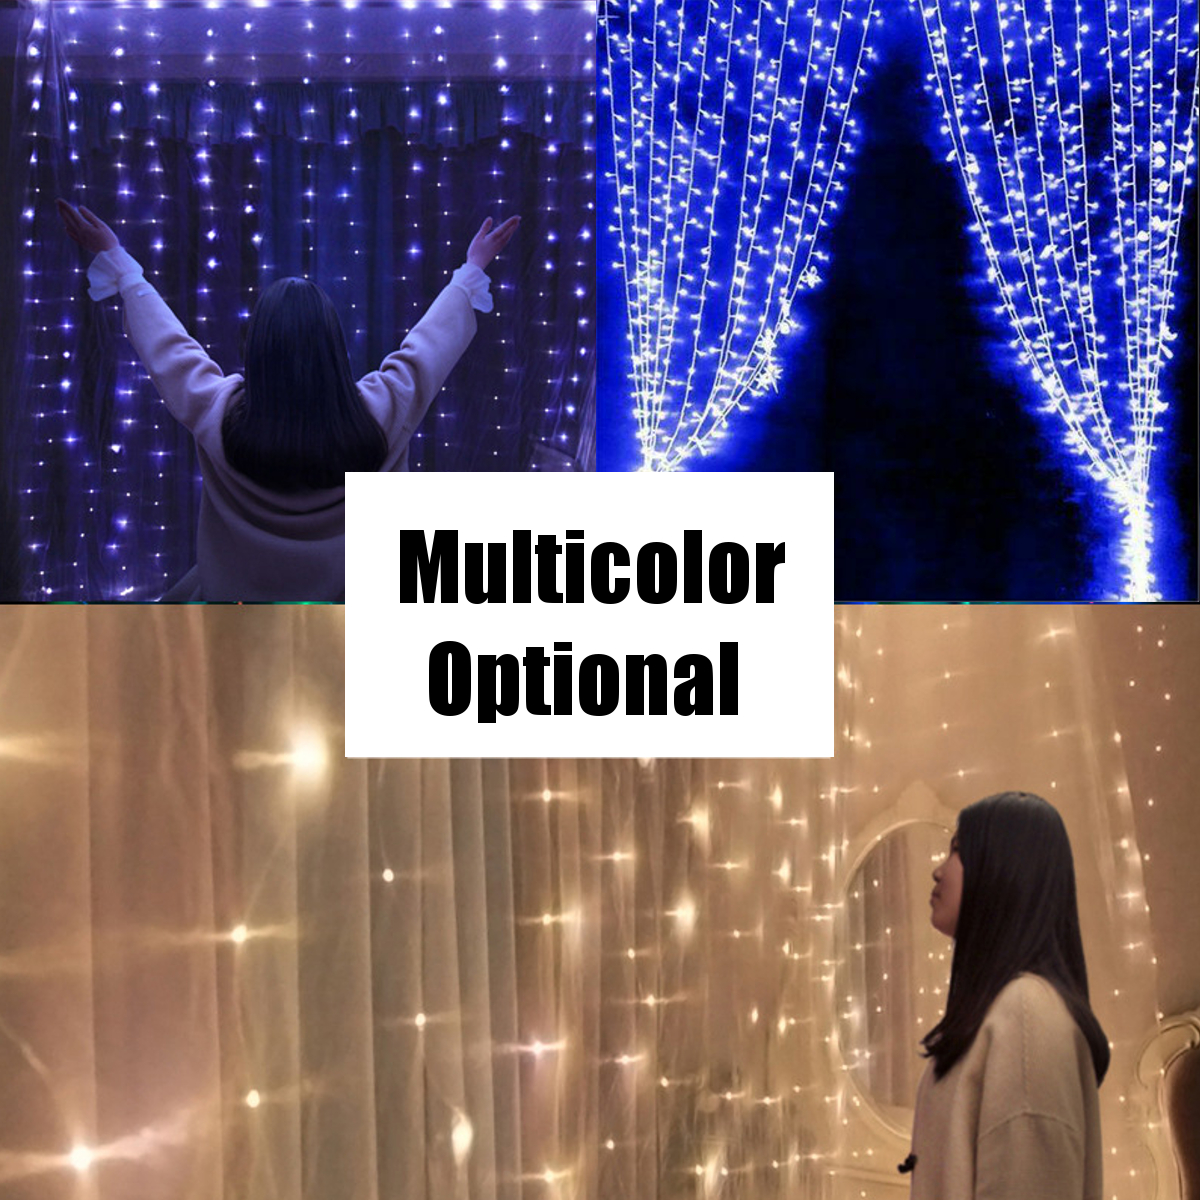 USB-5V-RC-Remote-Control-200300LED-Curtain-Lamp-String-Fairy-Lights-Indoor-Outdoor-Garden-Party-Wedd-1773781-7